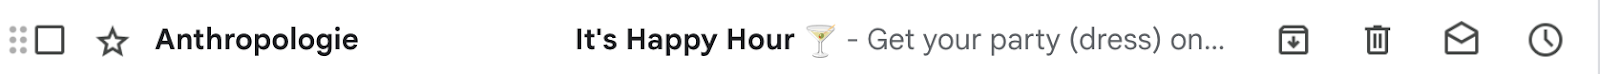 email subject line, it’s happy hour